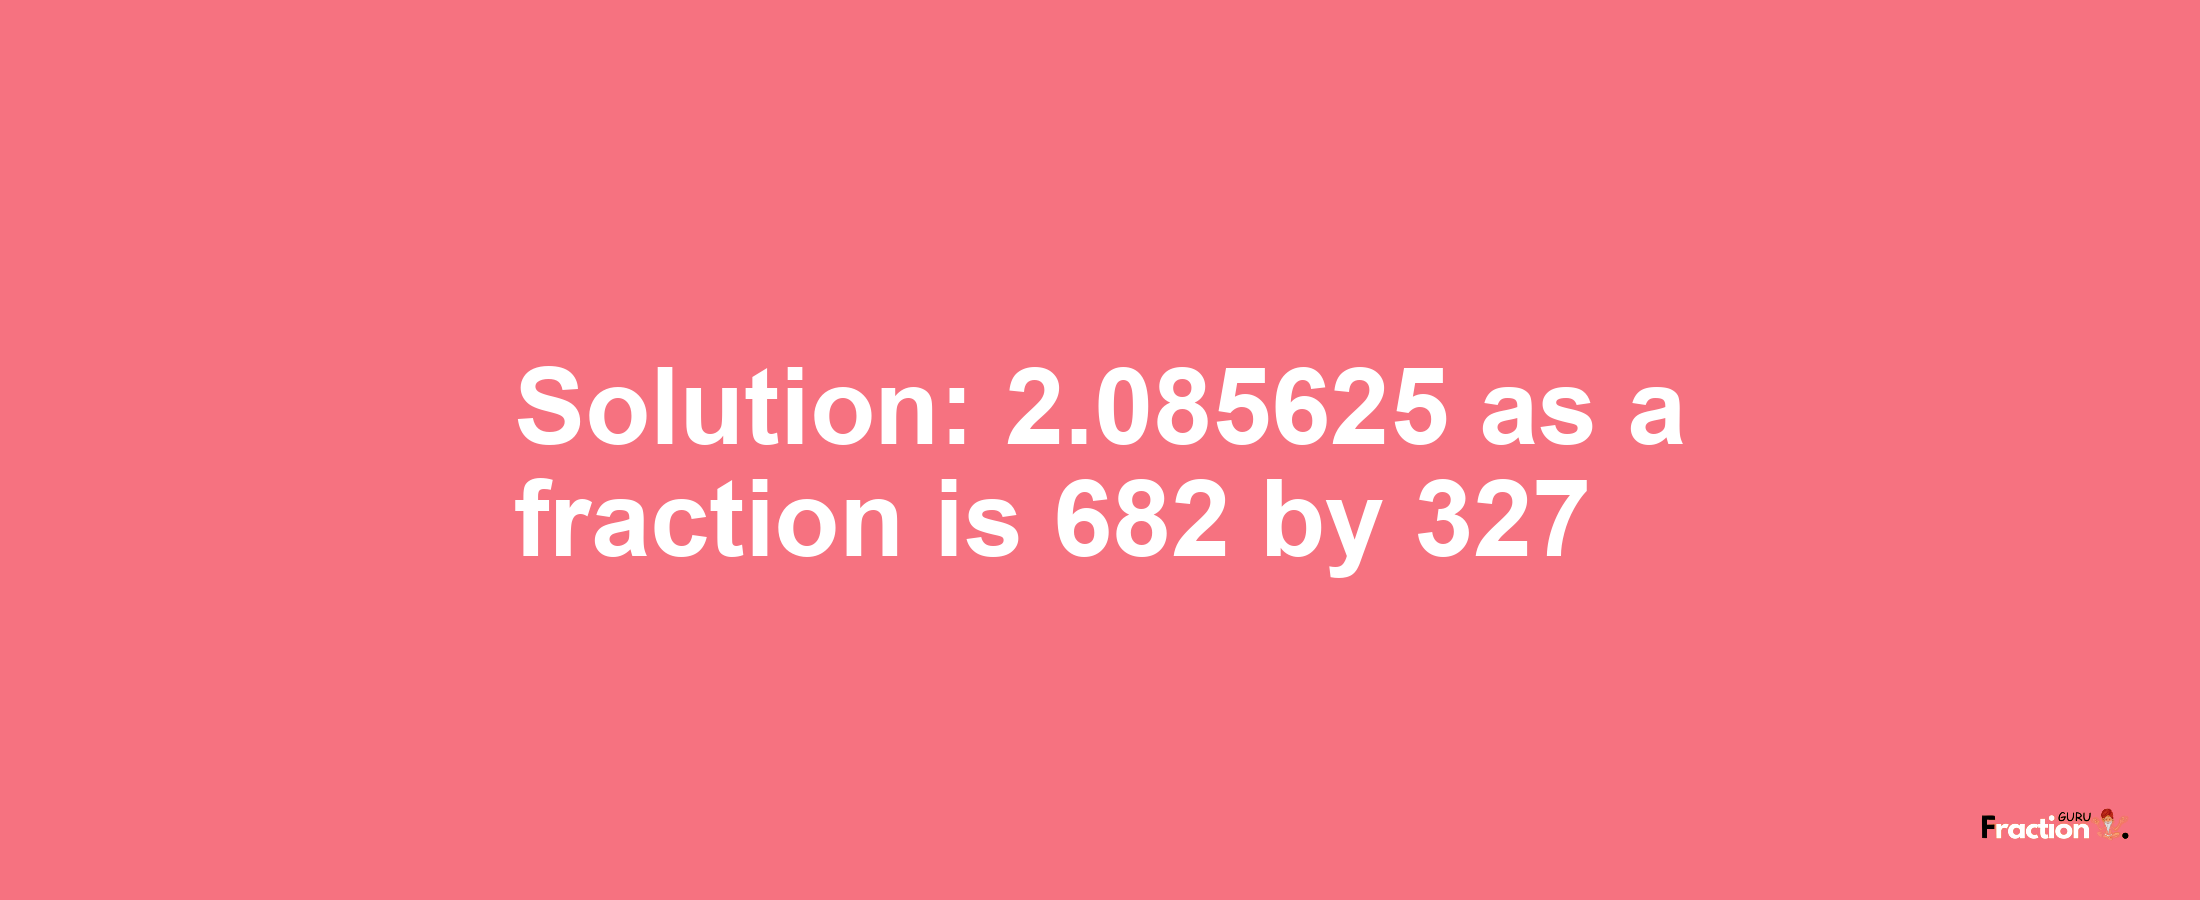 Solution:2.085625 as a fraction is 682/327